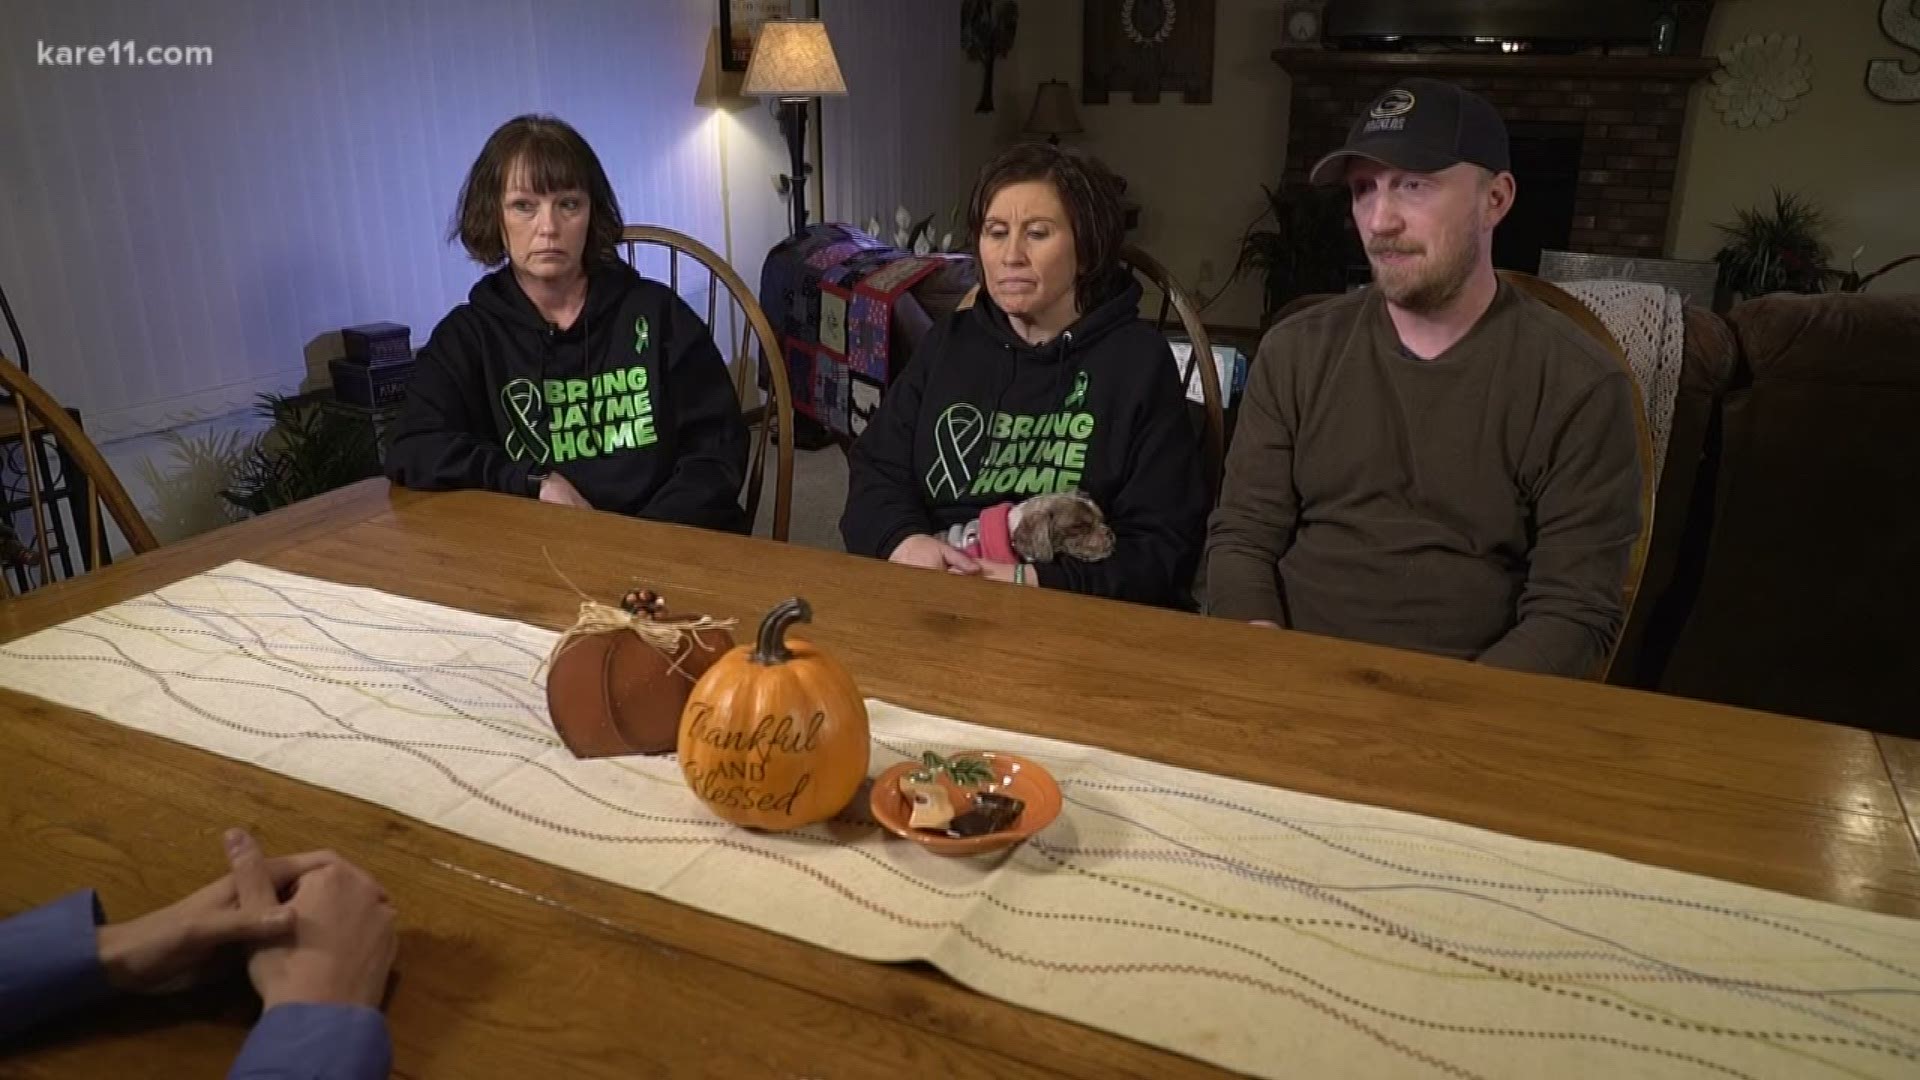 We're hearing from Jayme Closs' extended family ahead of the first holiday since Jayme disappeared and her parents were killed.